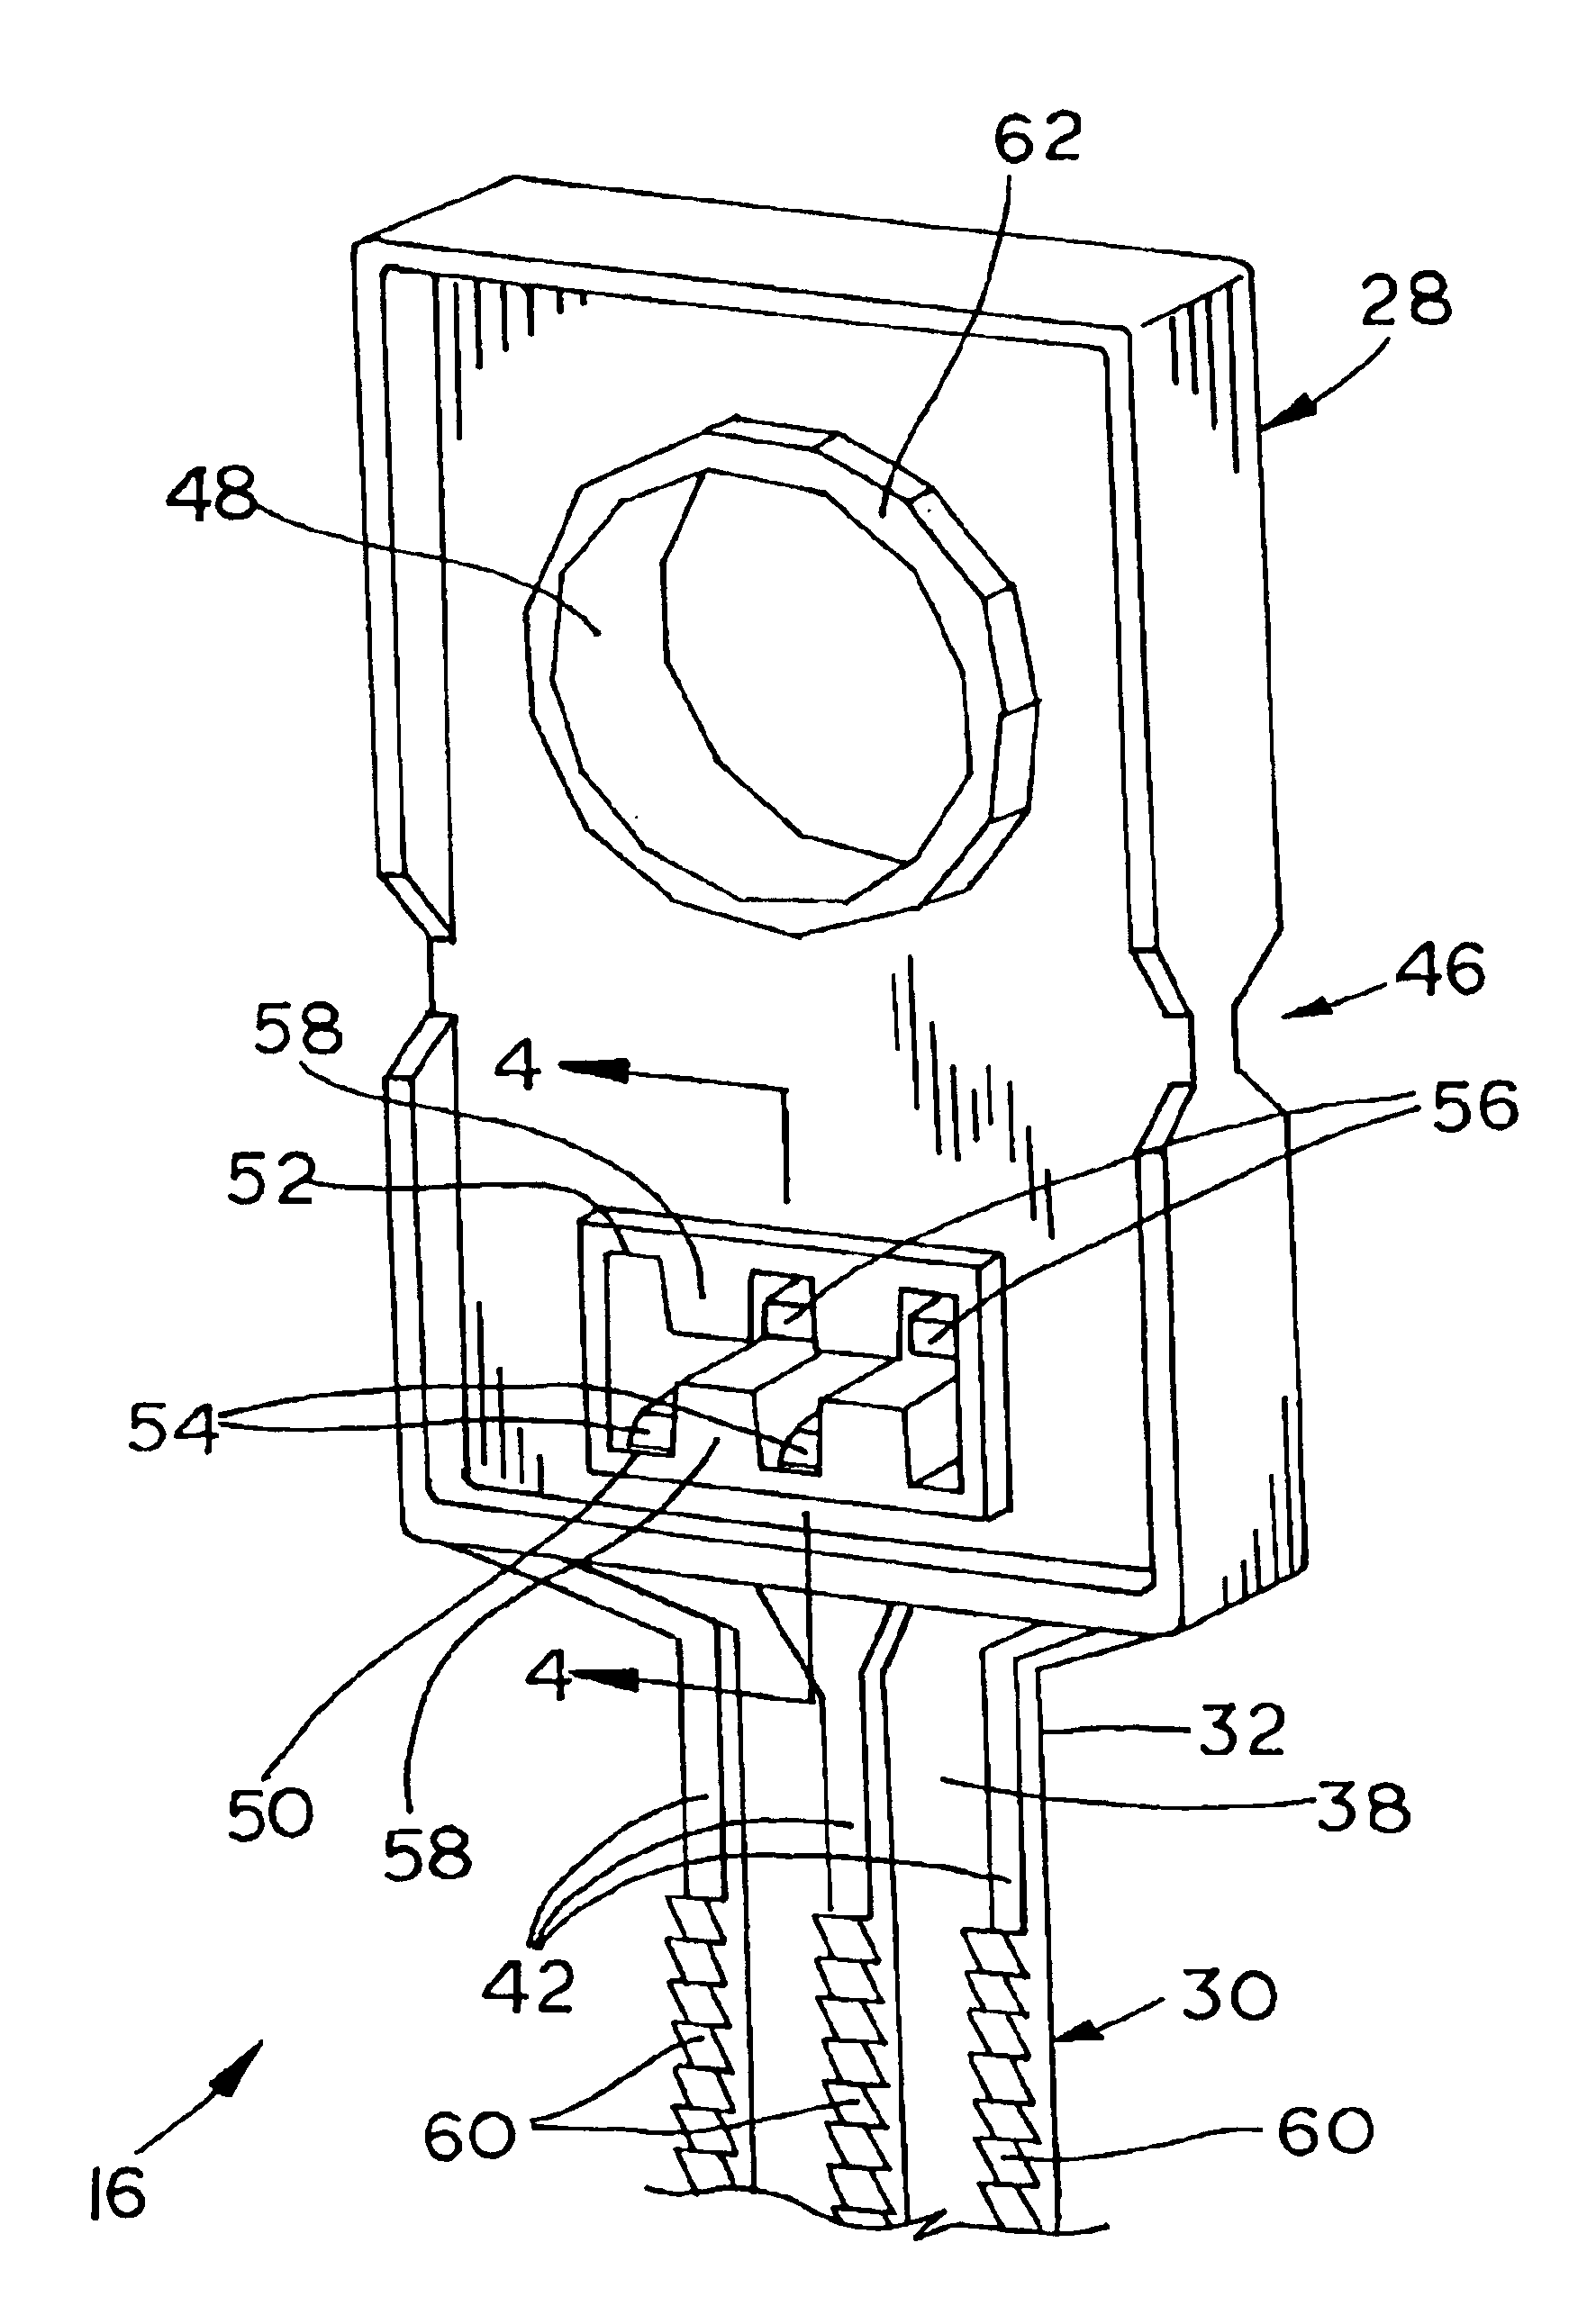 Electrical assembly including an electrical tie